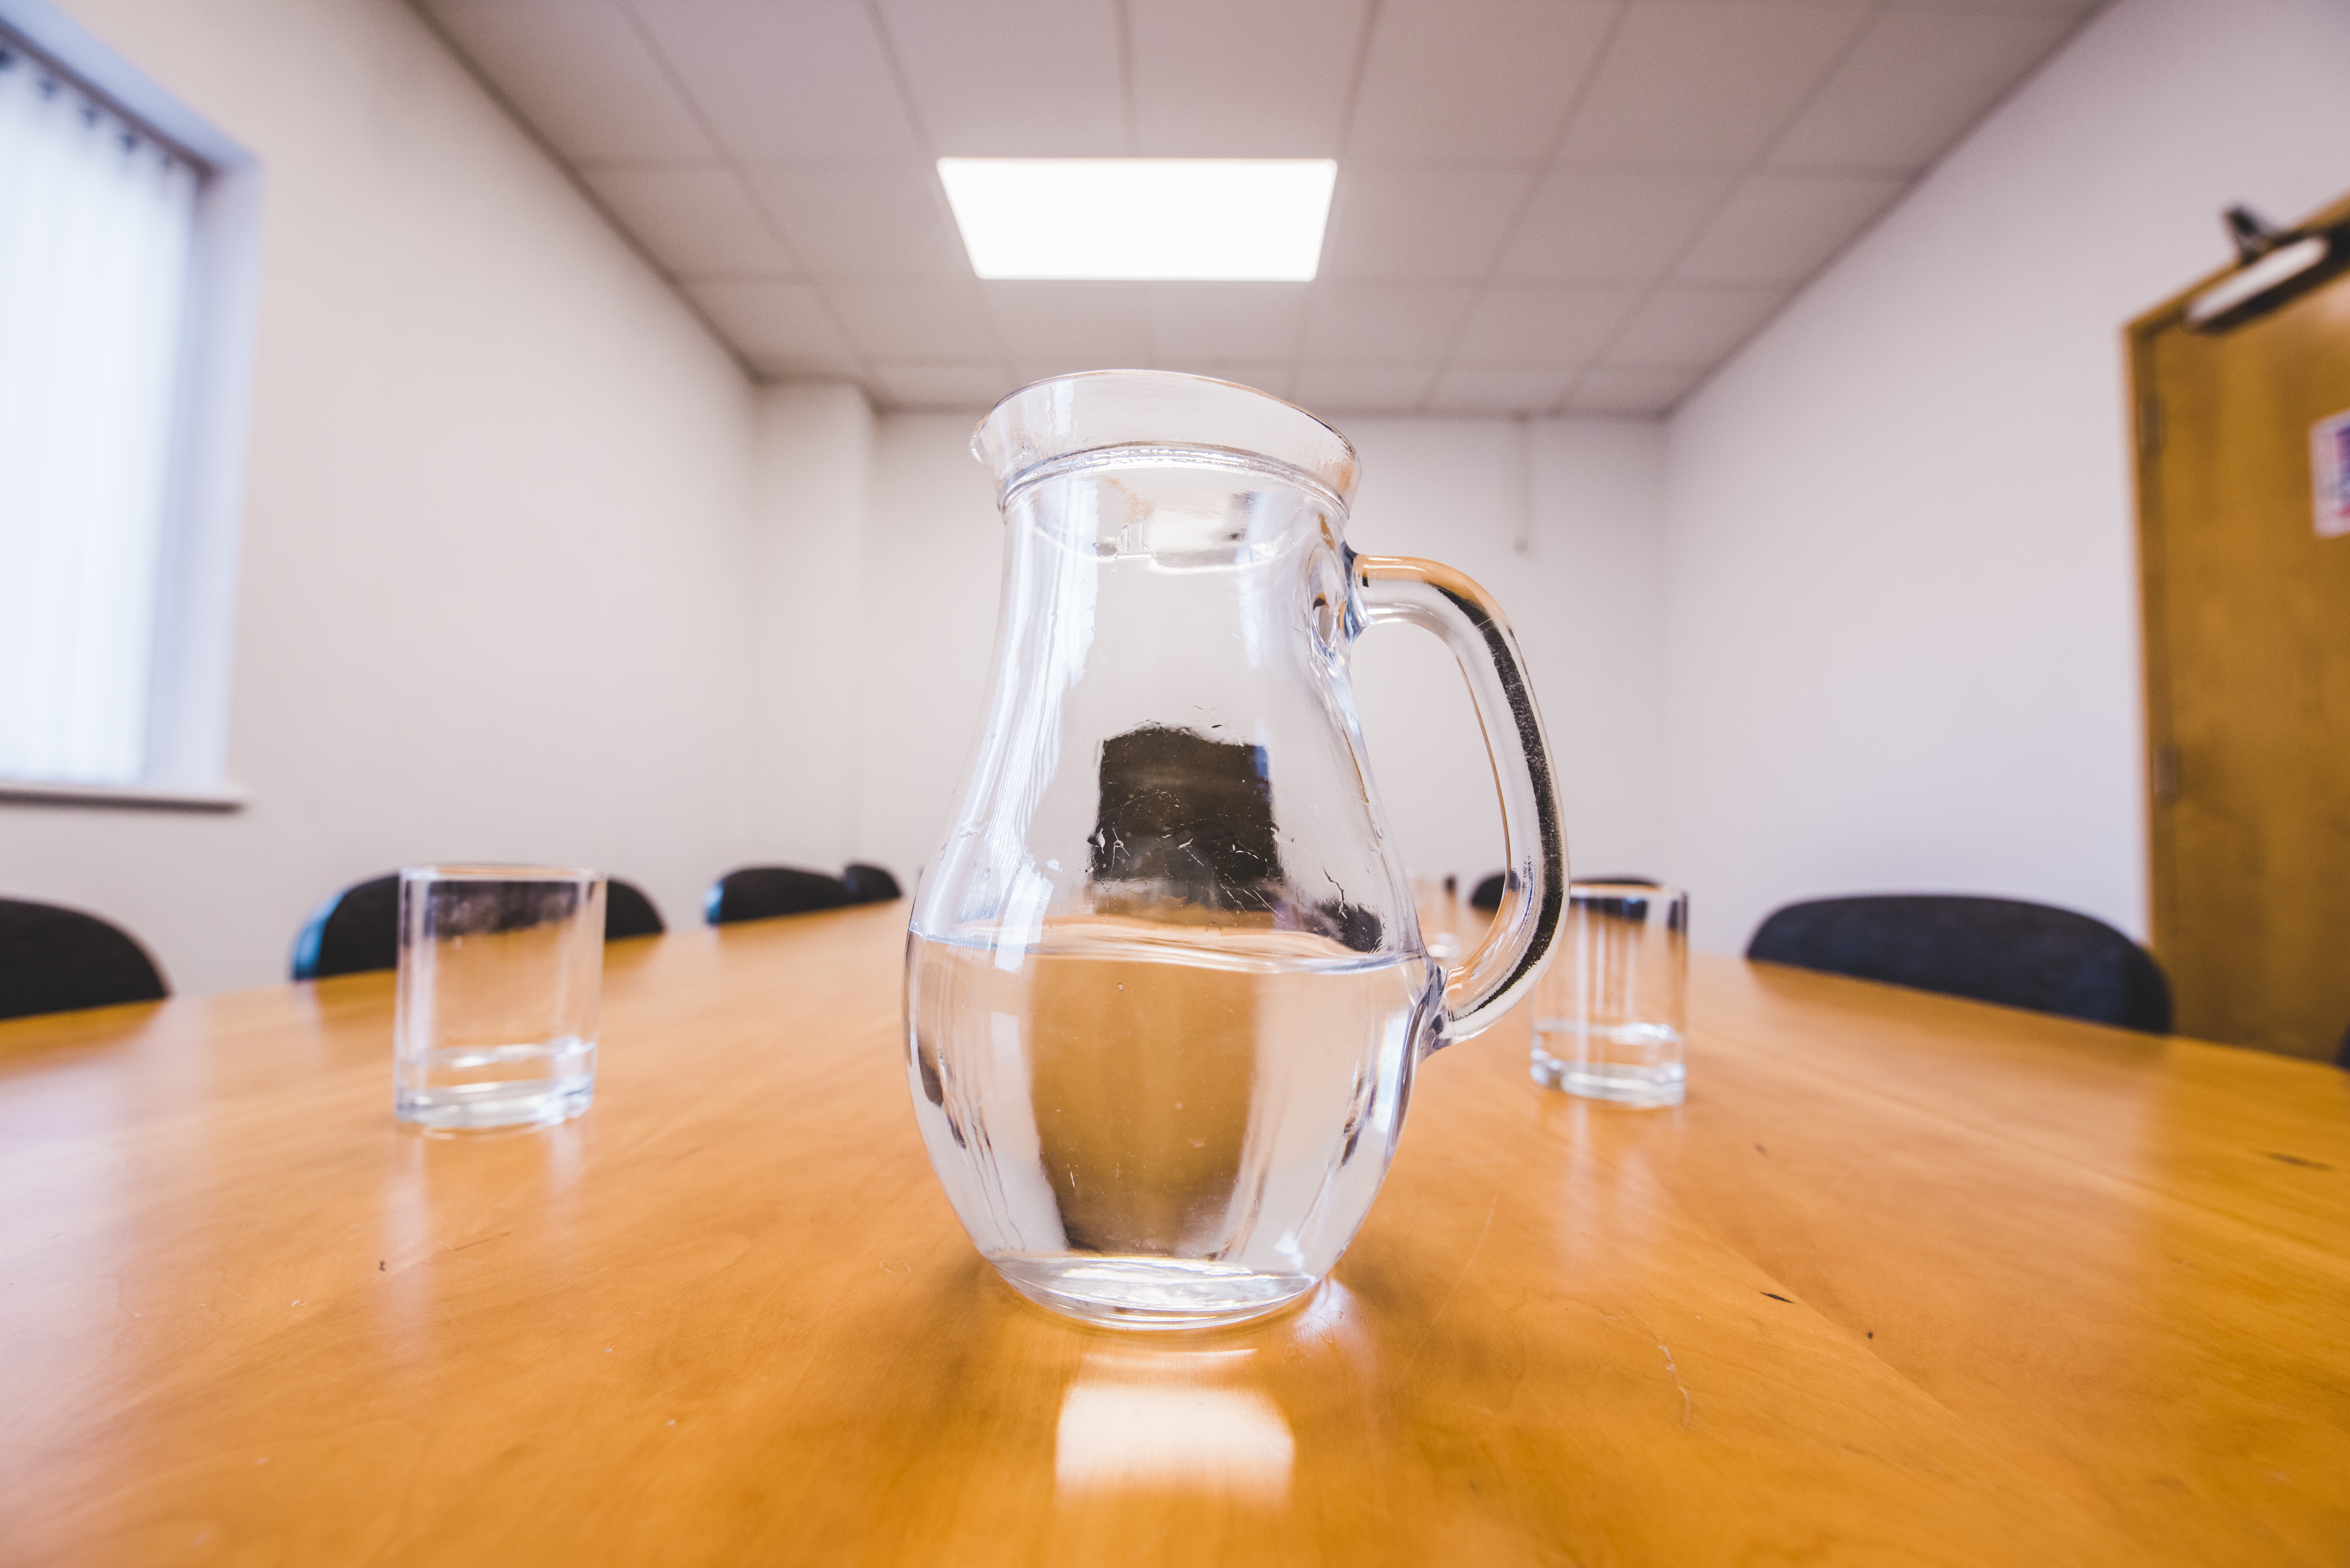 Image of conference room shot through water jug